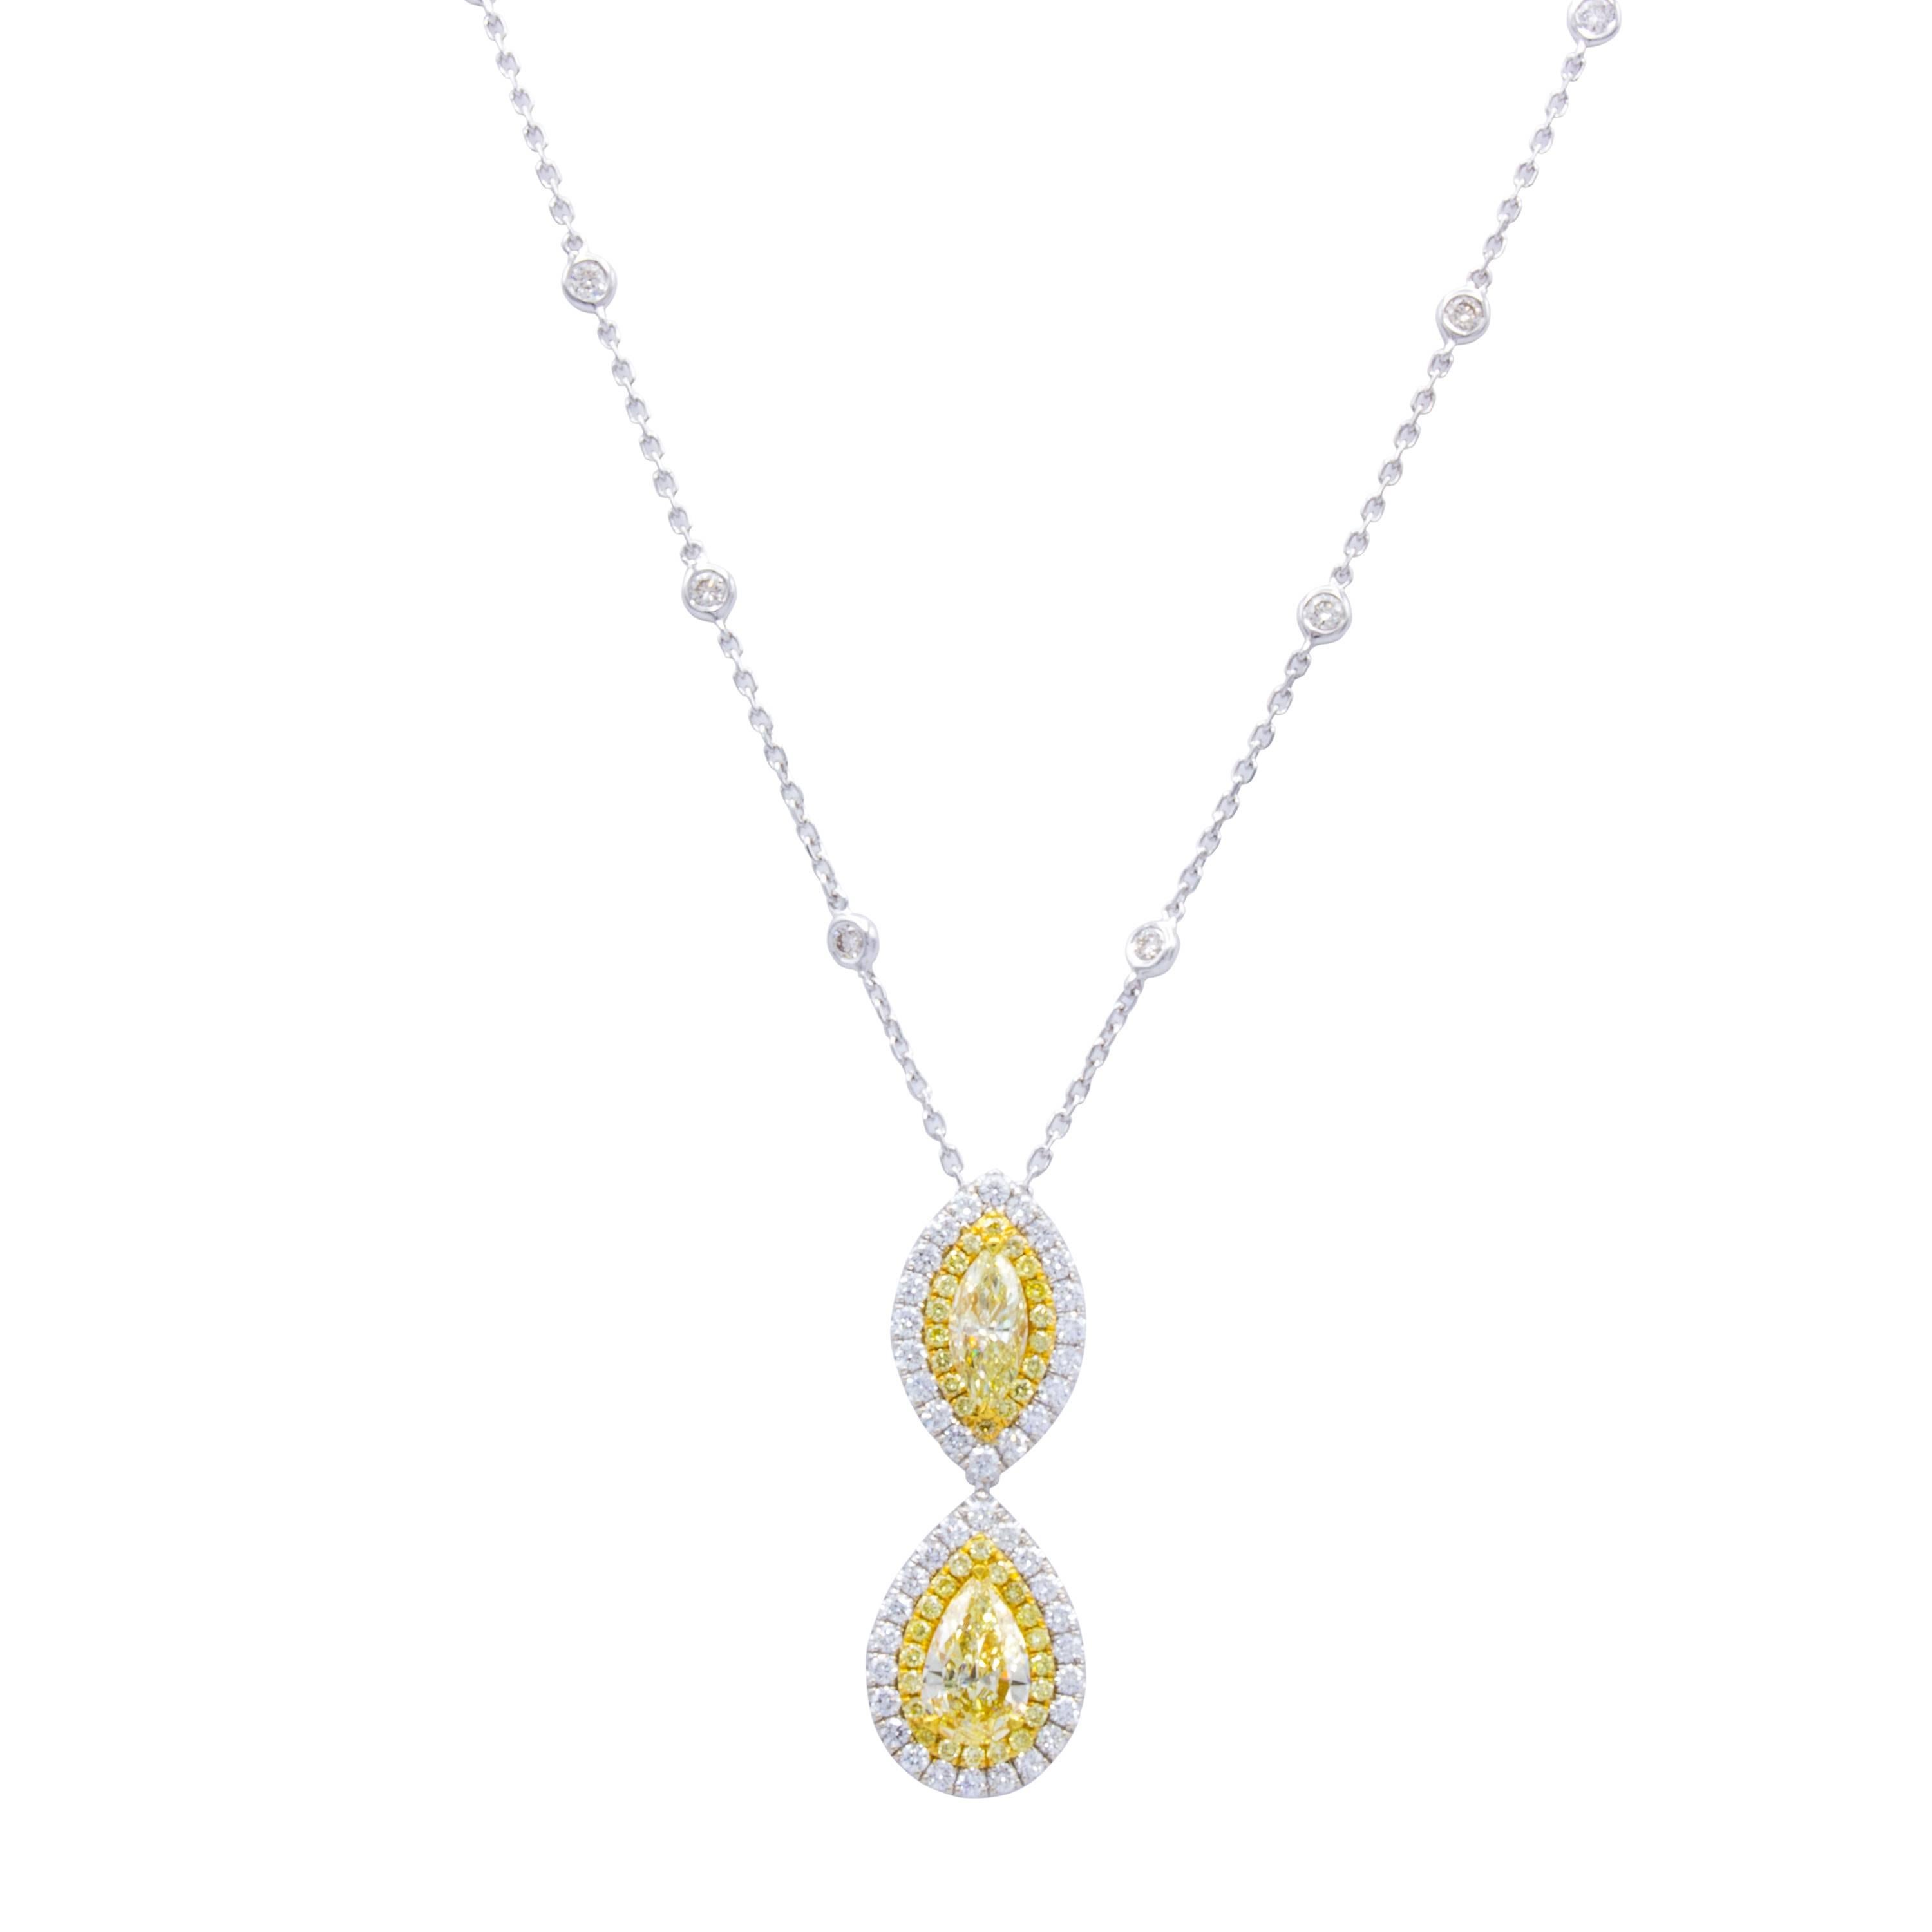 A Rosenberg Diamonds & Co. pendant necklace featuring two incredibly rare and beautiful natural fancy yellow marquise diamonds. Two rows of round brilliant pave diamonds in white and yellow surround the stones and dangle from a delicate 18Kt white